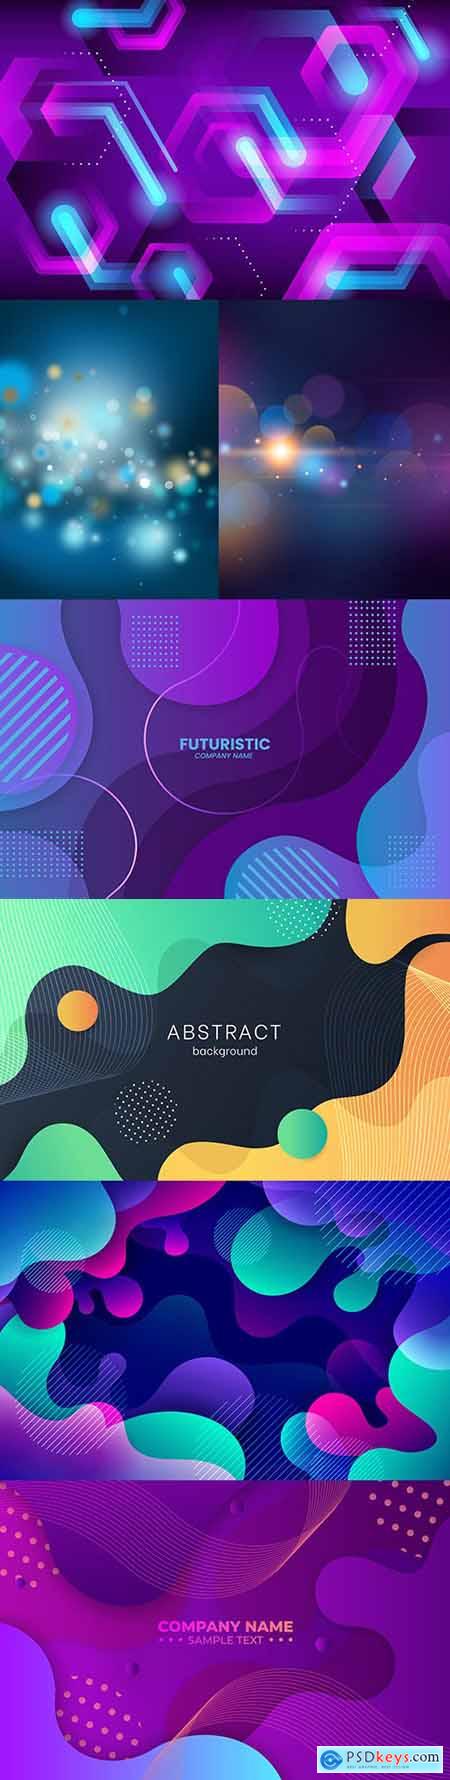 Abstract gradient wave background colorful shapes 5